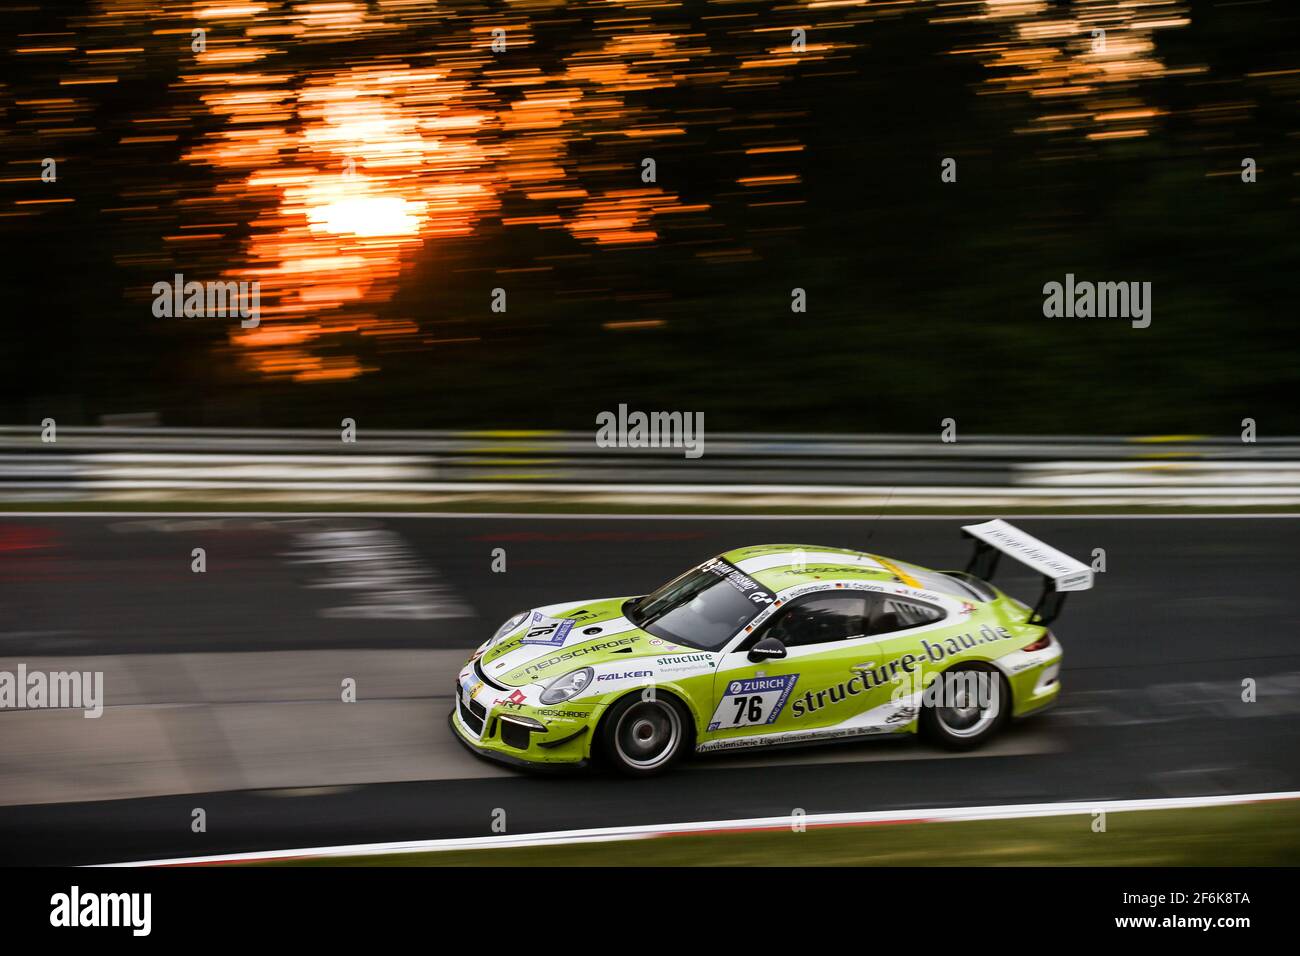 76 ANDRE HAUSCHILD Kim, CZYBORRA Michael, HUTTENRAUCH Mathias, HRT-Performance Porsche 991 GT3 Cup, action during the 2017 ADAC Zurich 24 Hours of Nurburgring, Germany from May 25 to 28 - Photo Antonin Vincent / DPPI Stock Photo